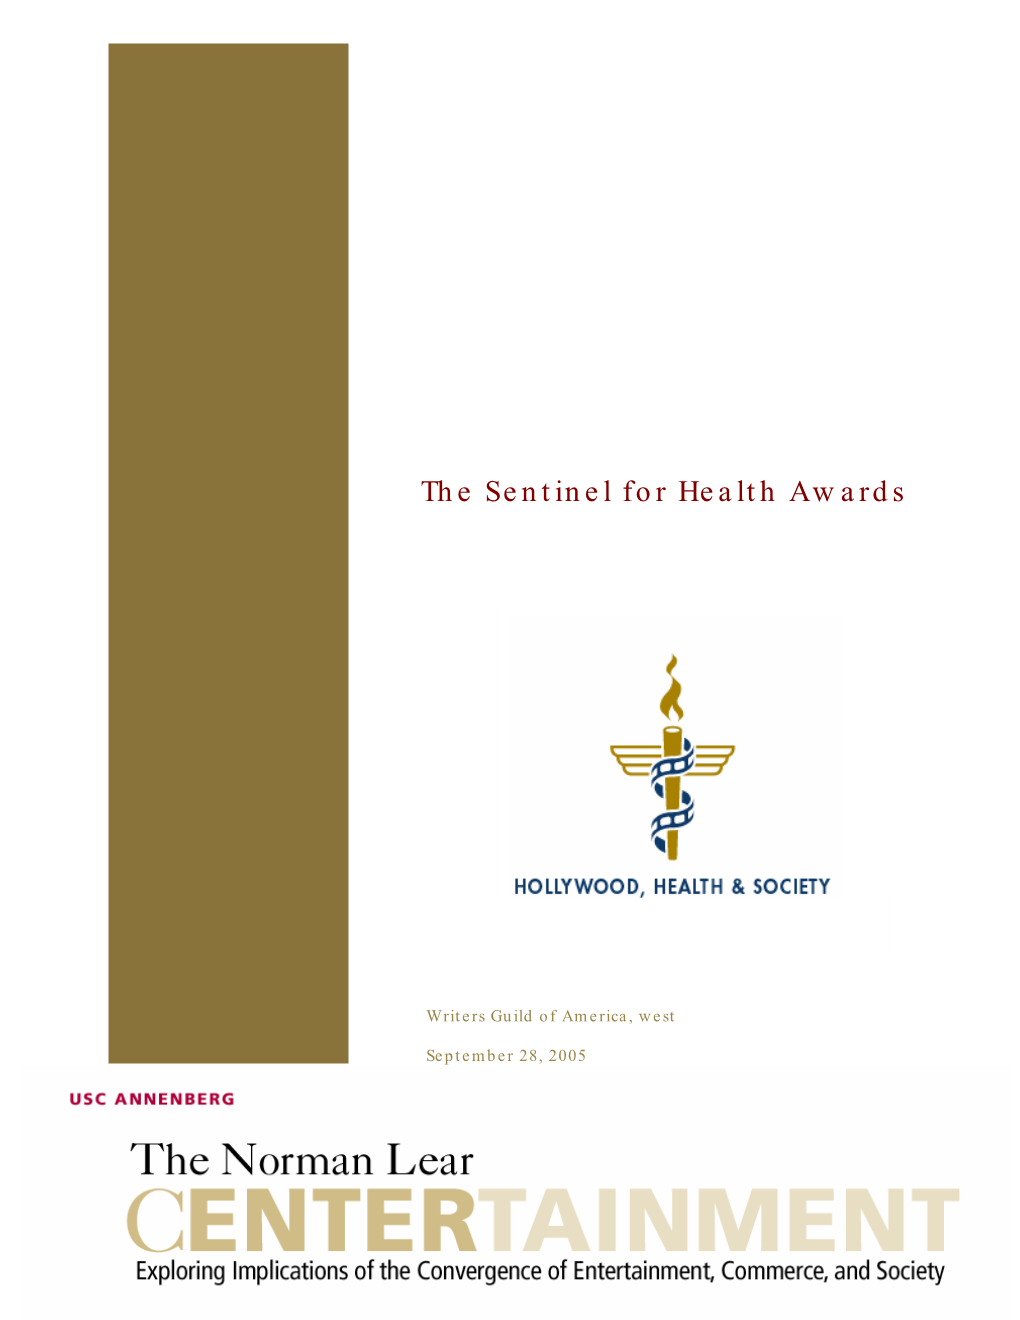 The Sentinel for Health Awards